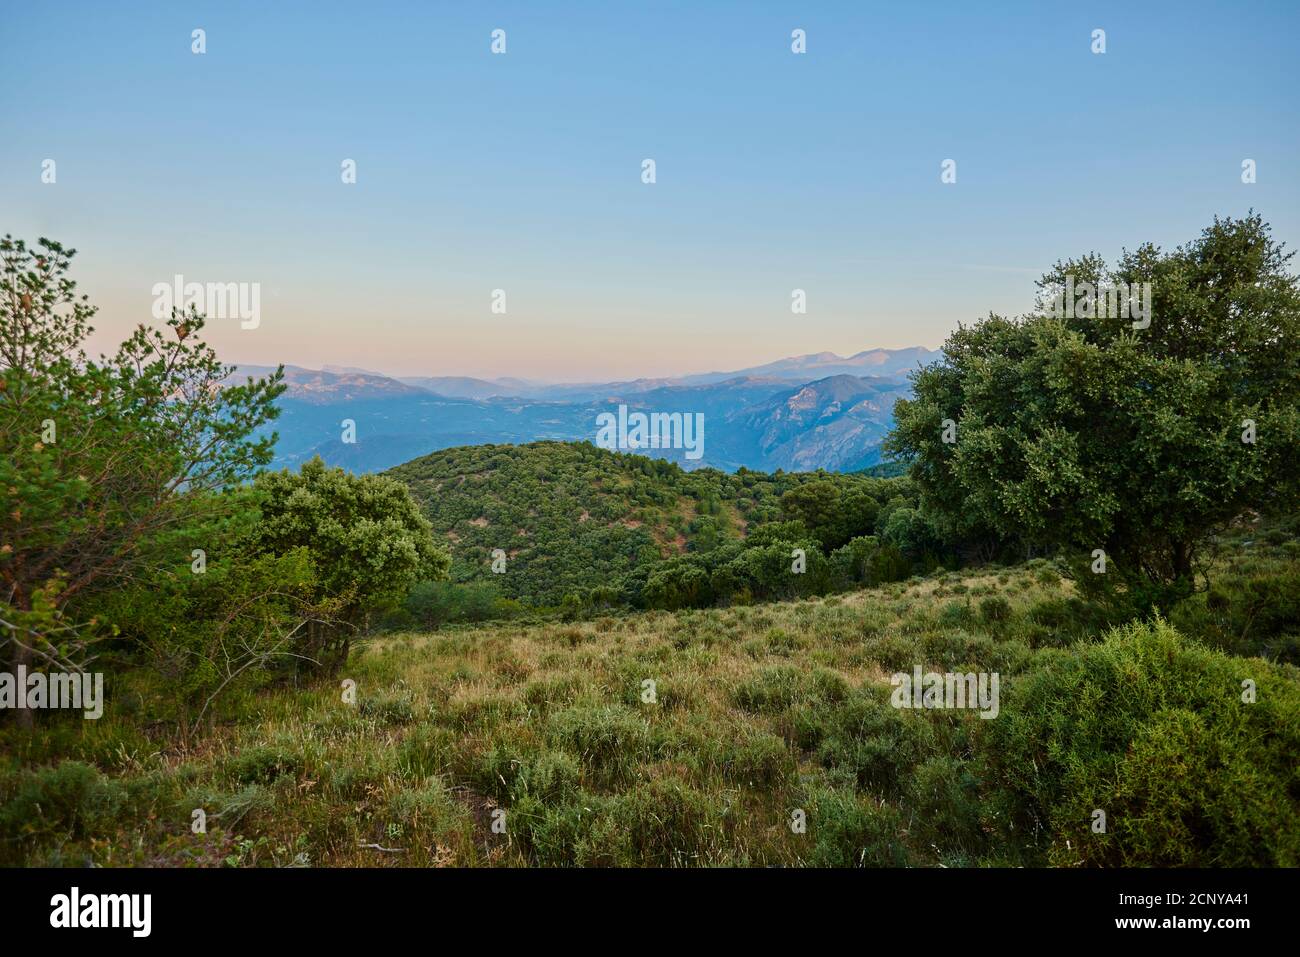 Landscape, Buseu, Lleida Province, Pyrenees, Catalonia, Northern Spain, Spain, Europe Stock Photo